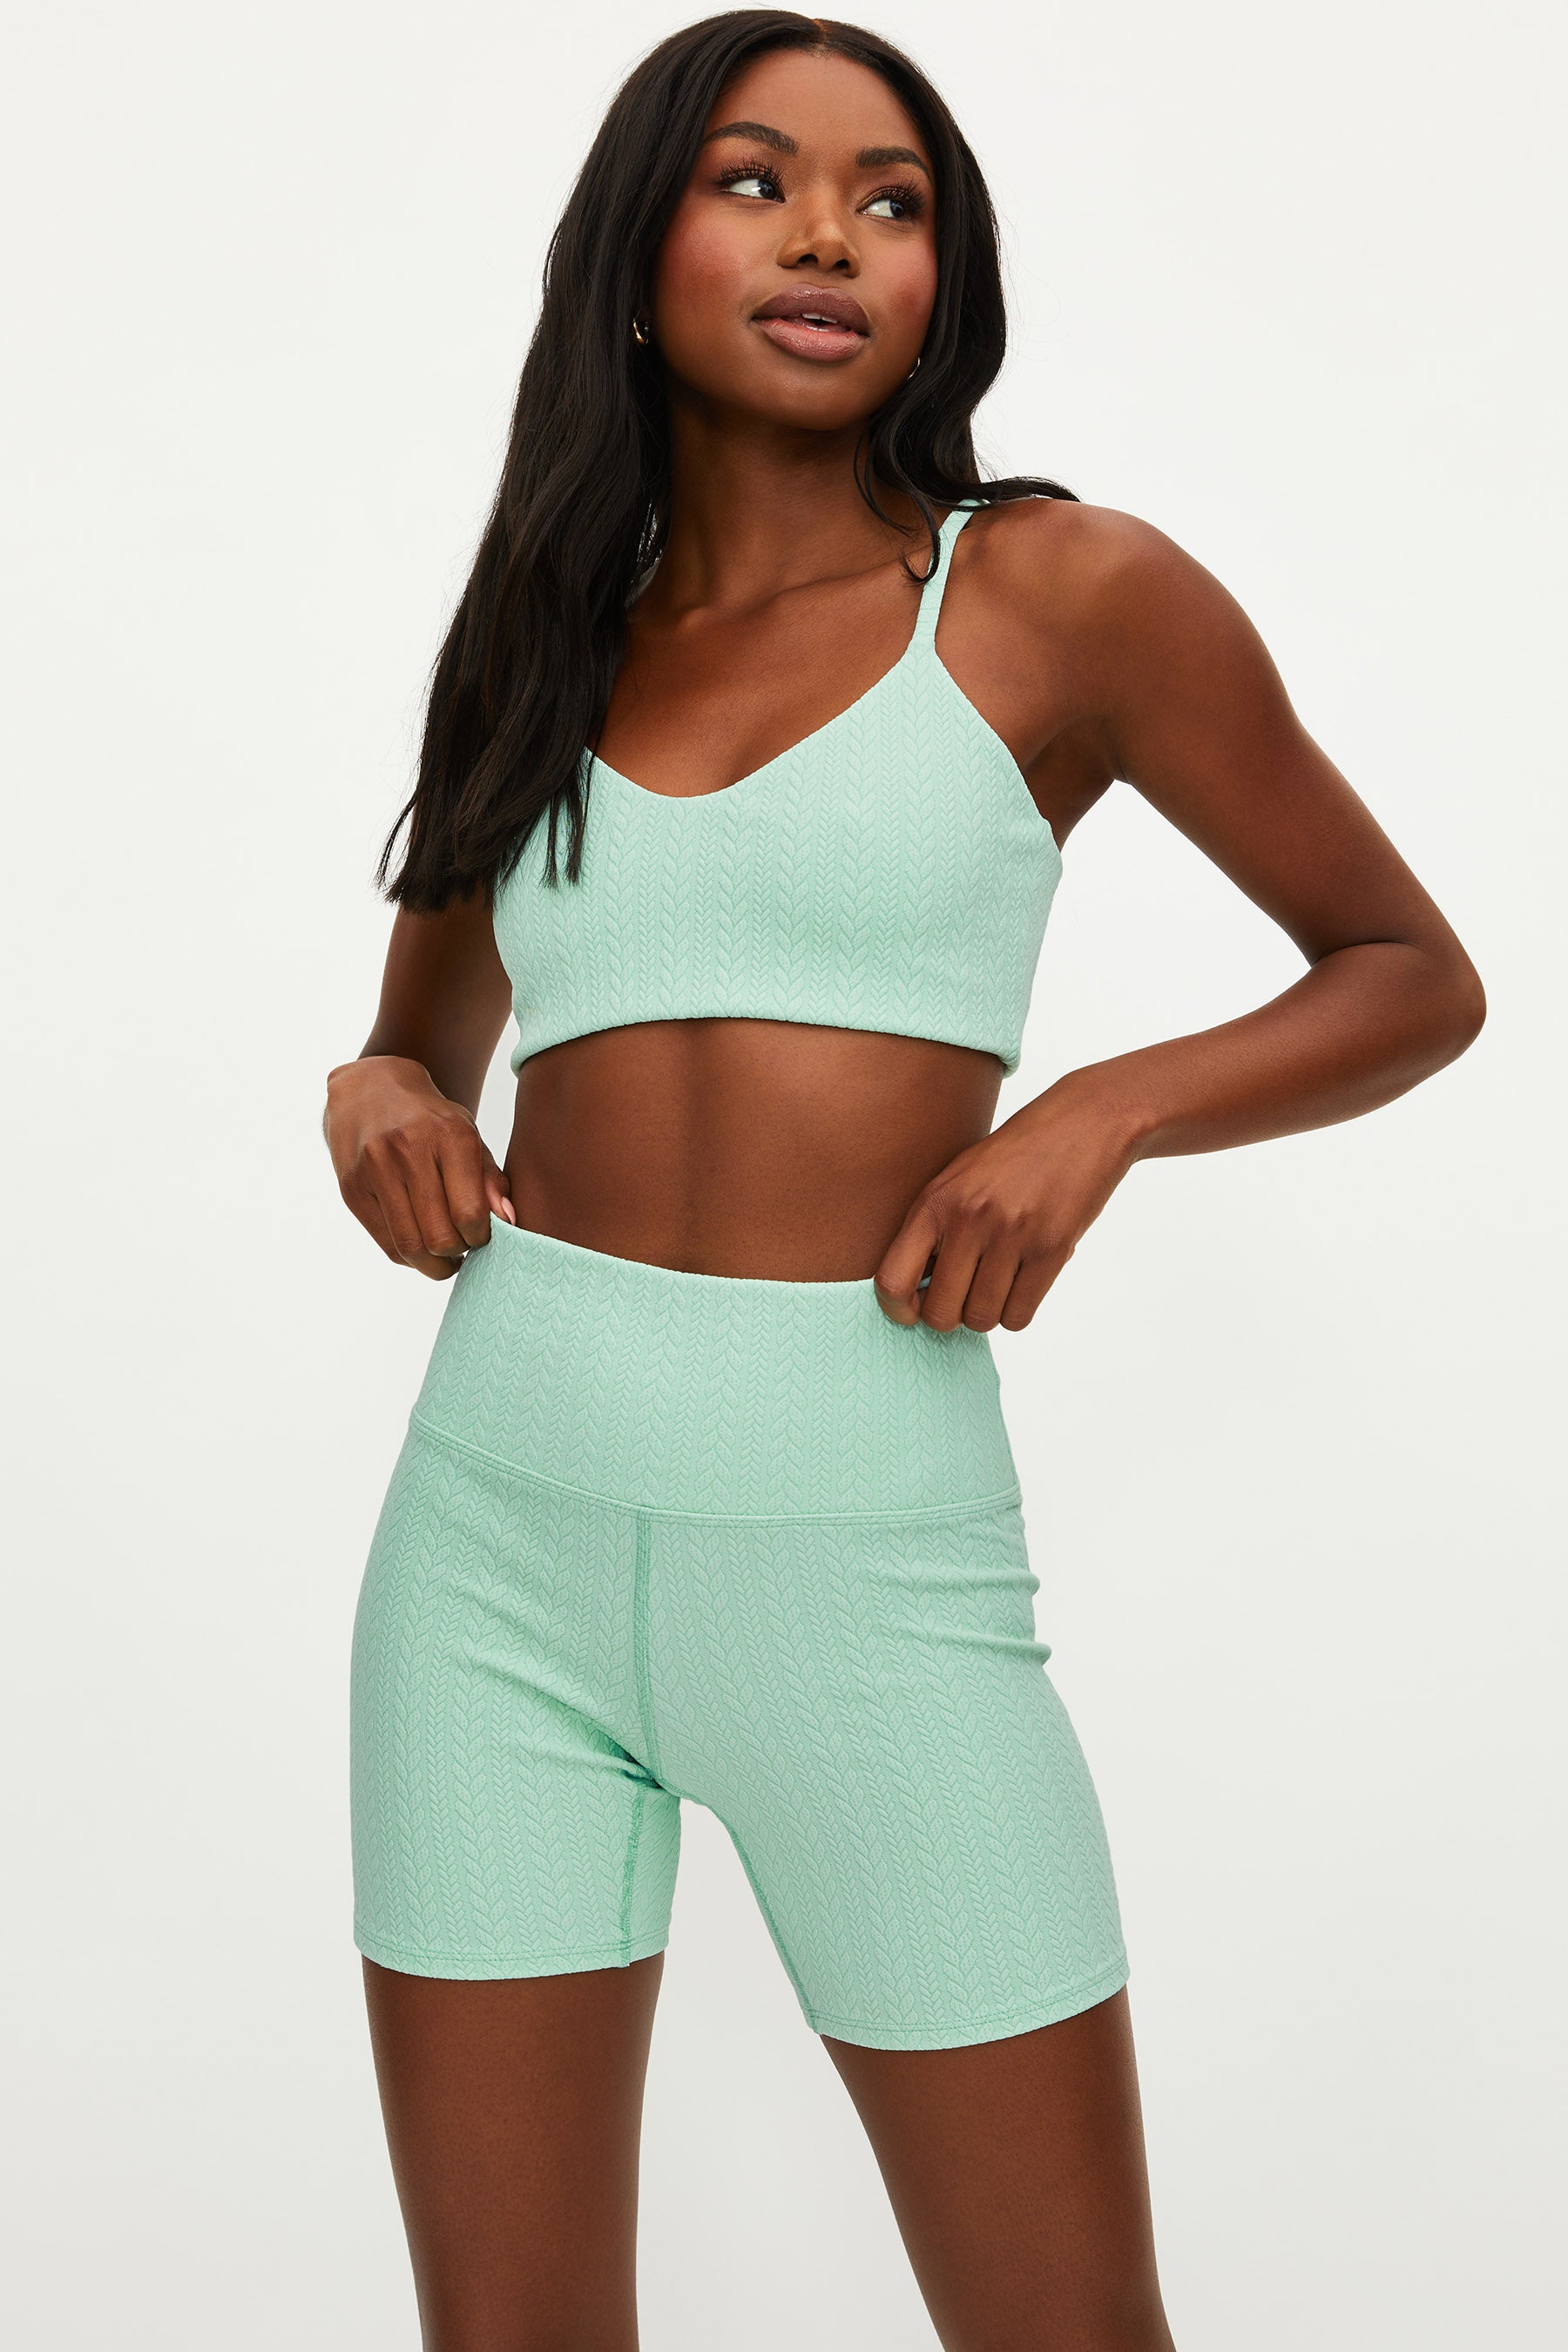 collection_sport-riot collection_sports-bras collection_best-sellers-active collection_new-active-arrivals collection_best-sellers-active collection_new-active-arrivals collection_best-sellers-active collection_sports-bras-1